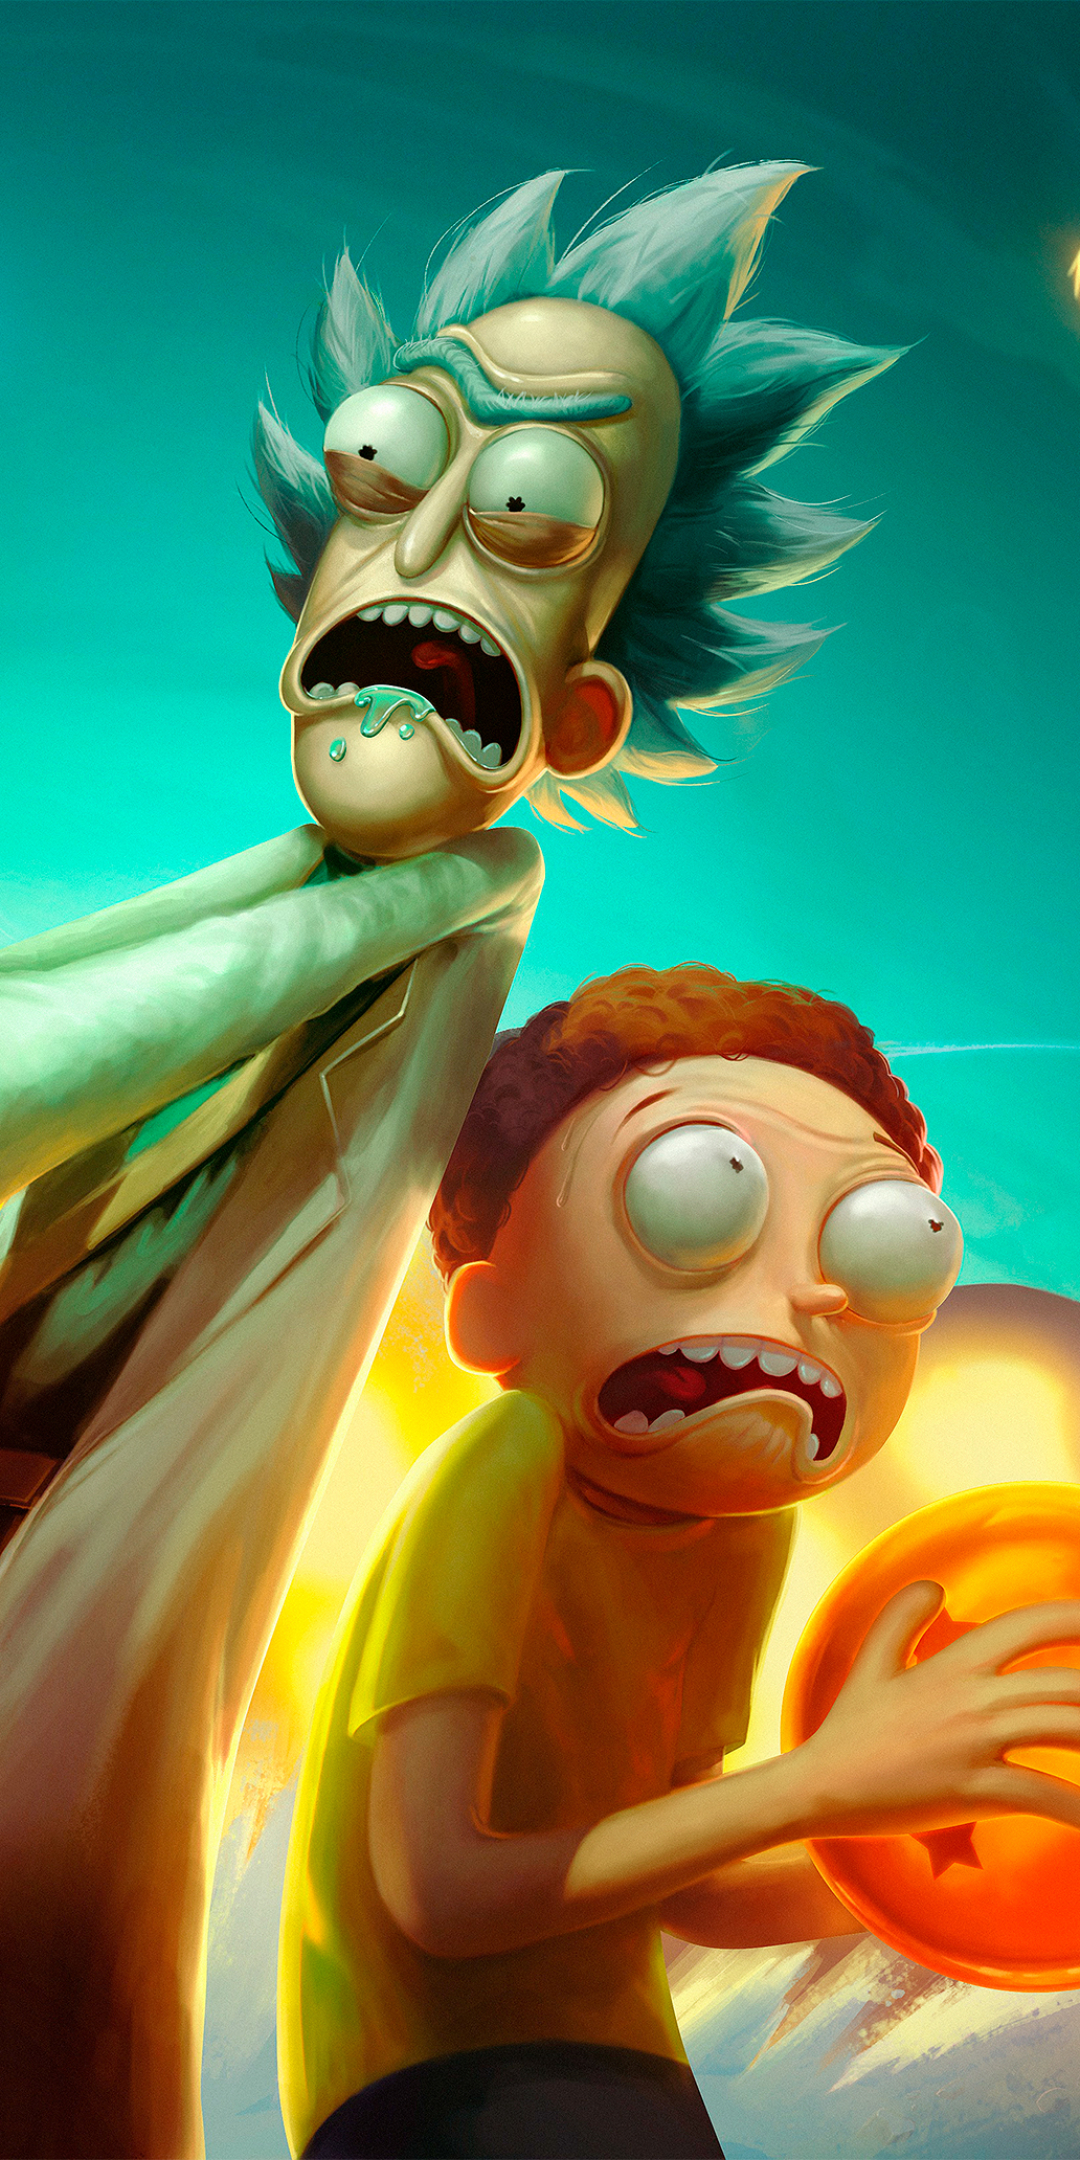 Mobile wallpaper: Breaking Bad, Tv Show, Morty Smith, Rick And